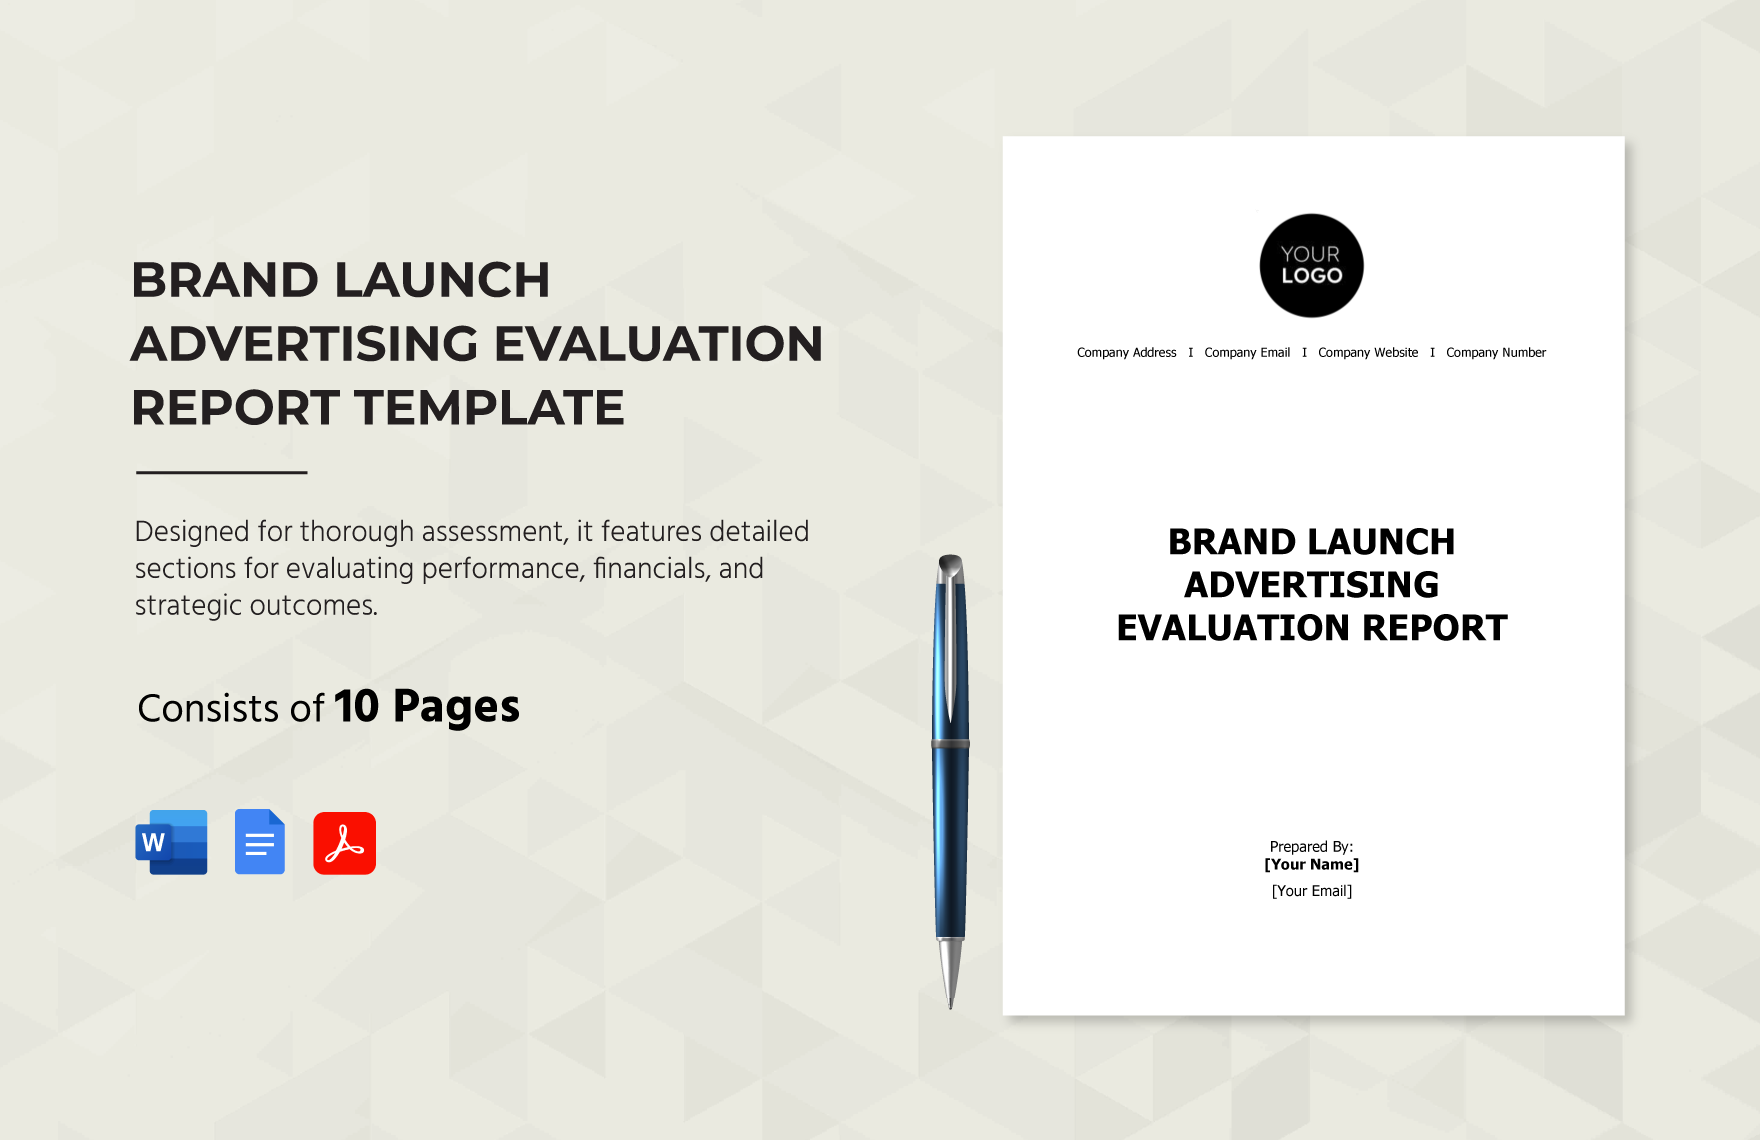 Brand Launch Advertising Evaluation Report Template in Word, Google Docs, PDF